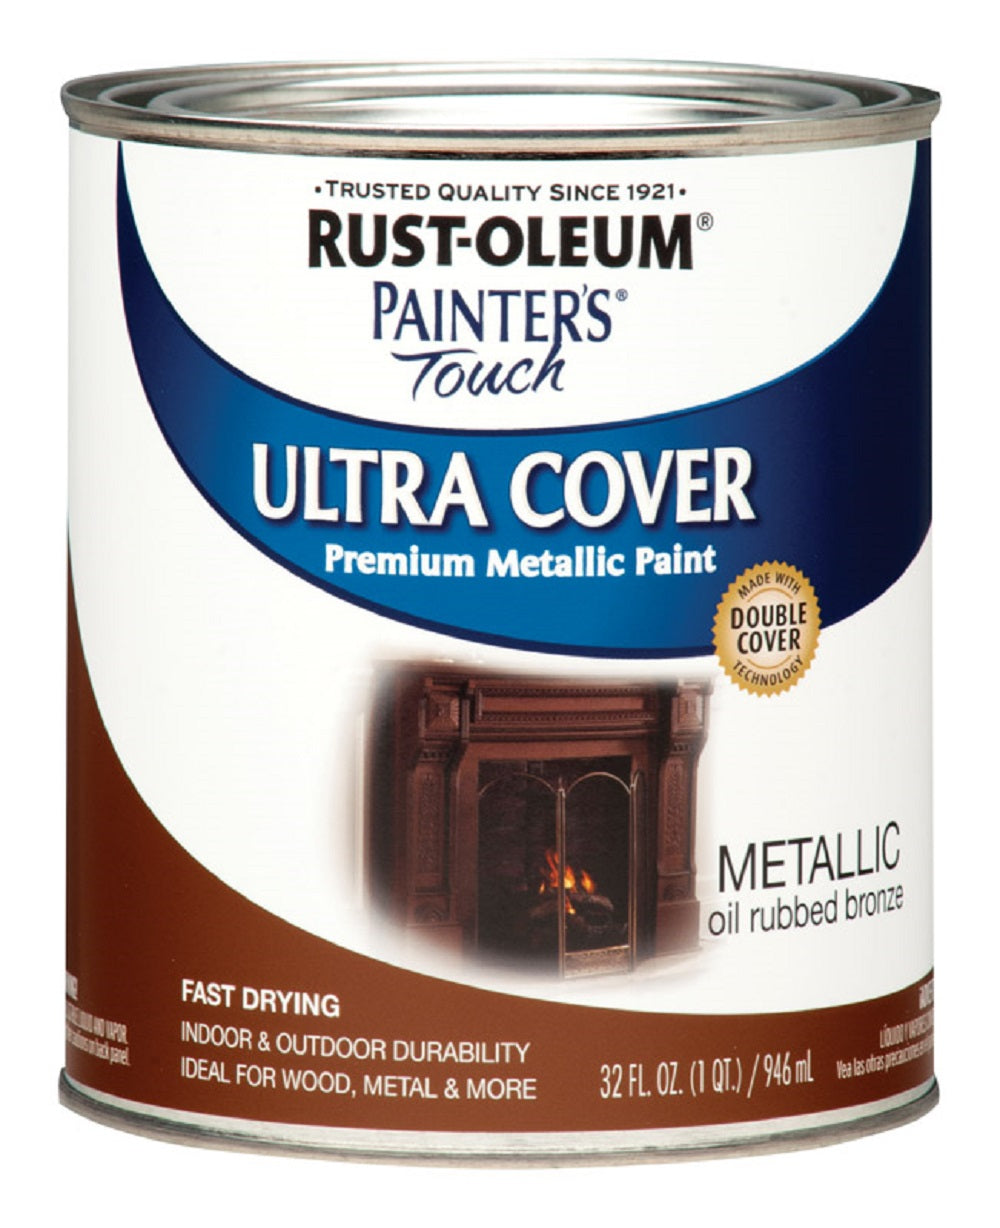 Buy rustoleum oil rubbed bronze quart - Online store for all paints, oil base in USA, on sale, low price, discount deals, coupon code